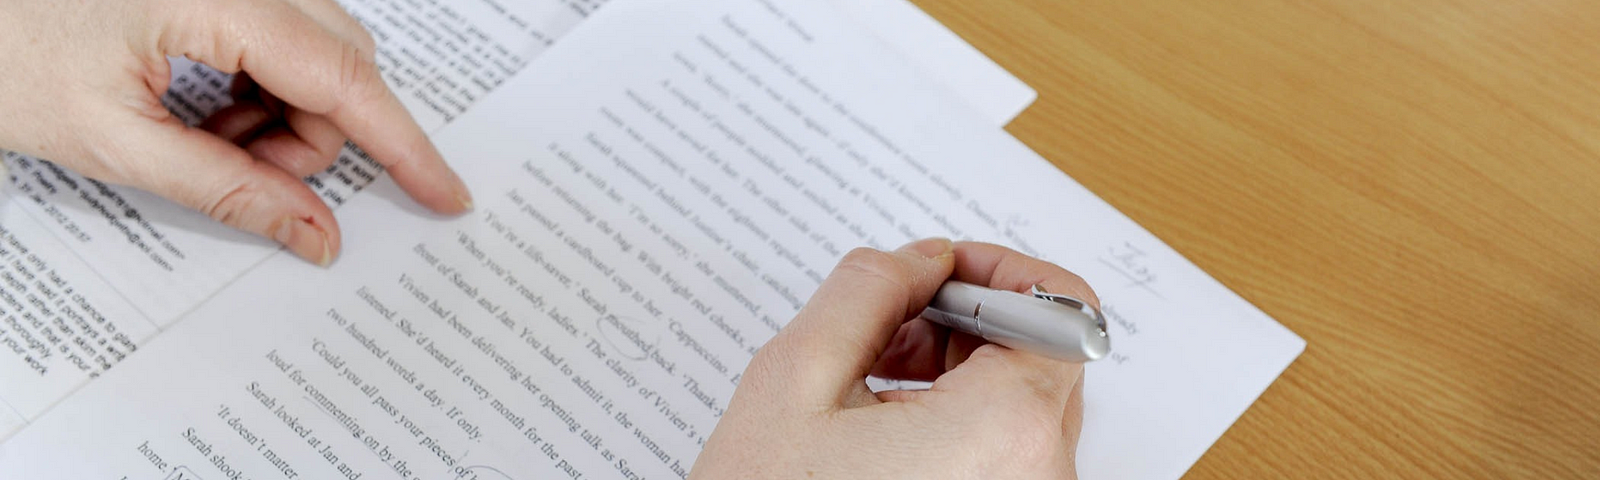 Hands in a sweater hover over a typed piece of paper with edit marks on it all over a light wooden surface. The left hand points at a line while the right hand holds a pen.